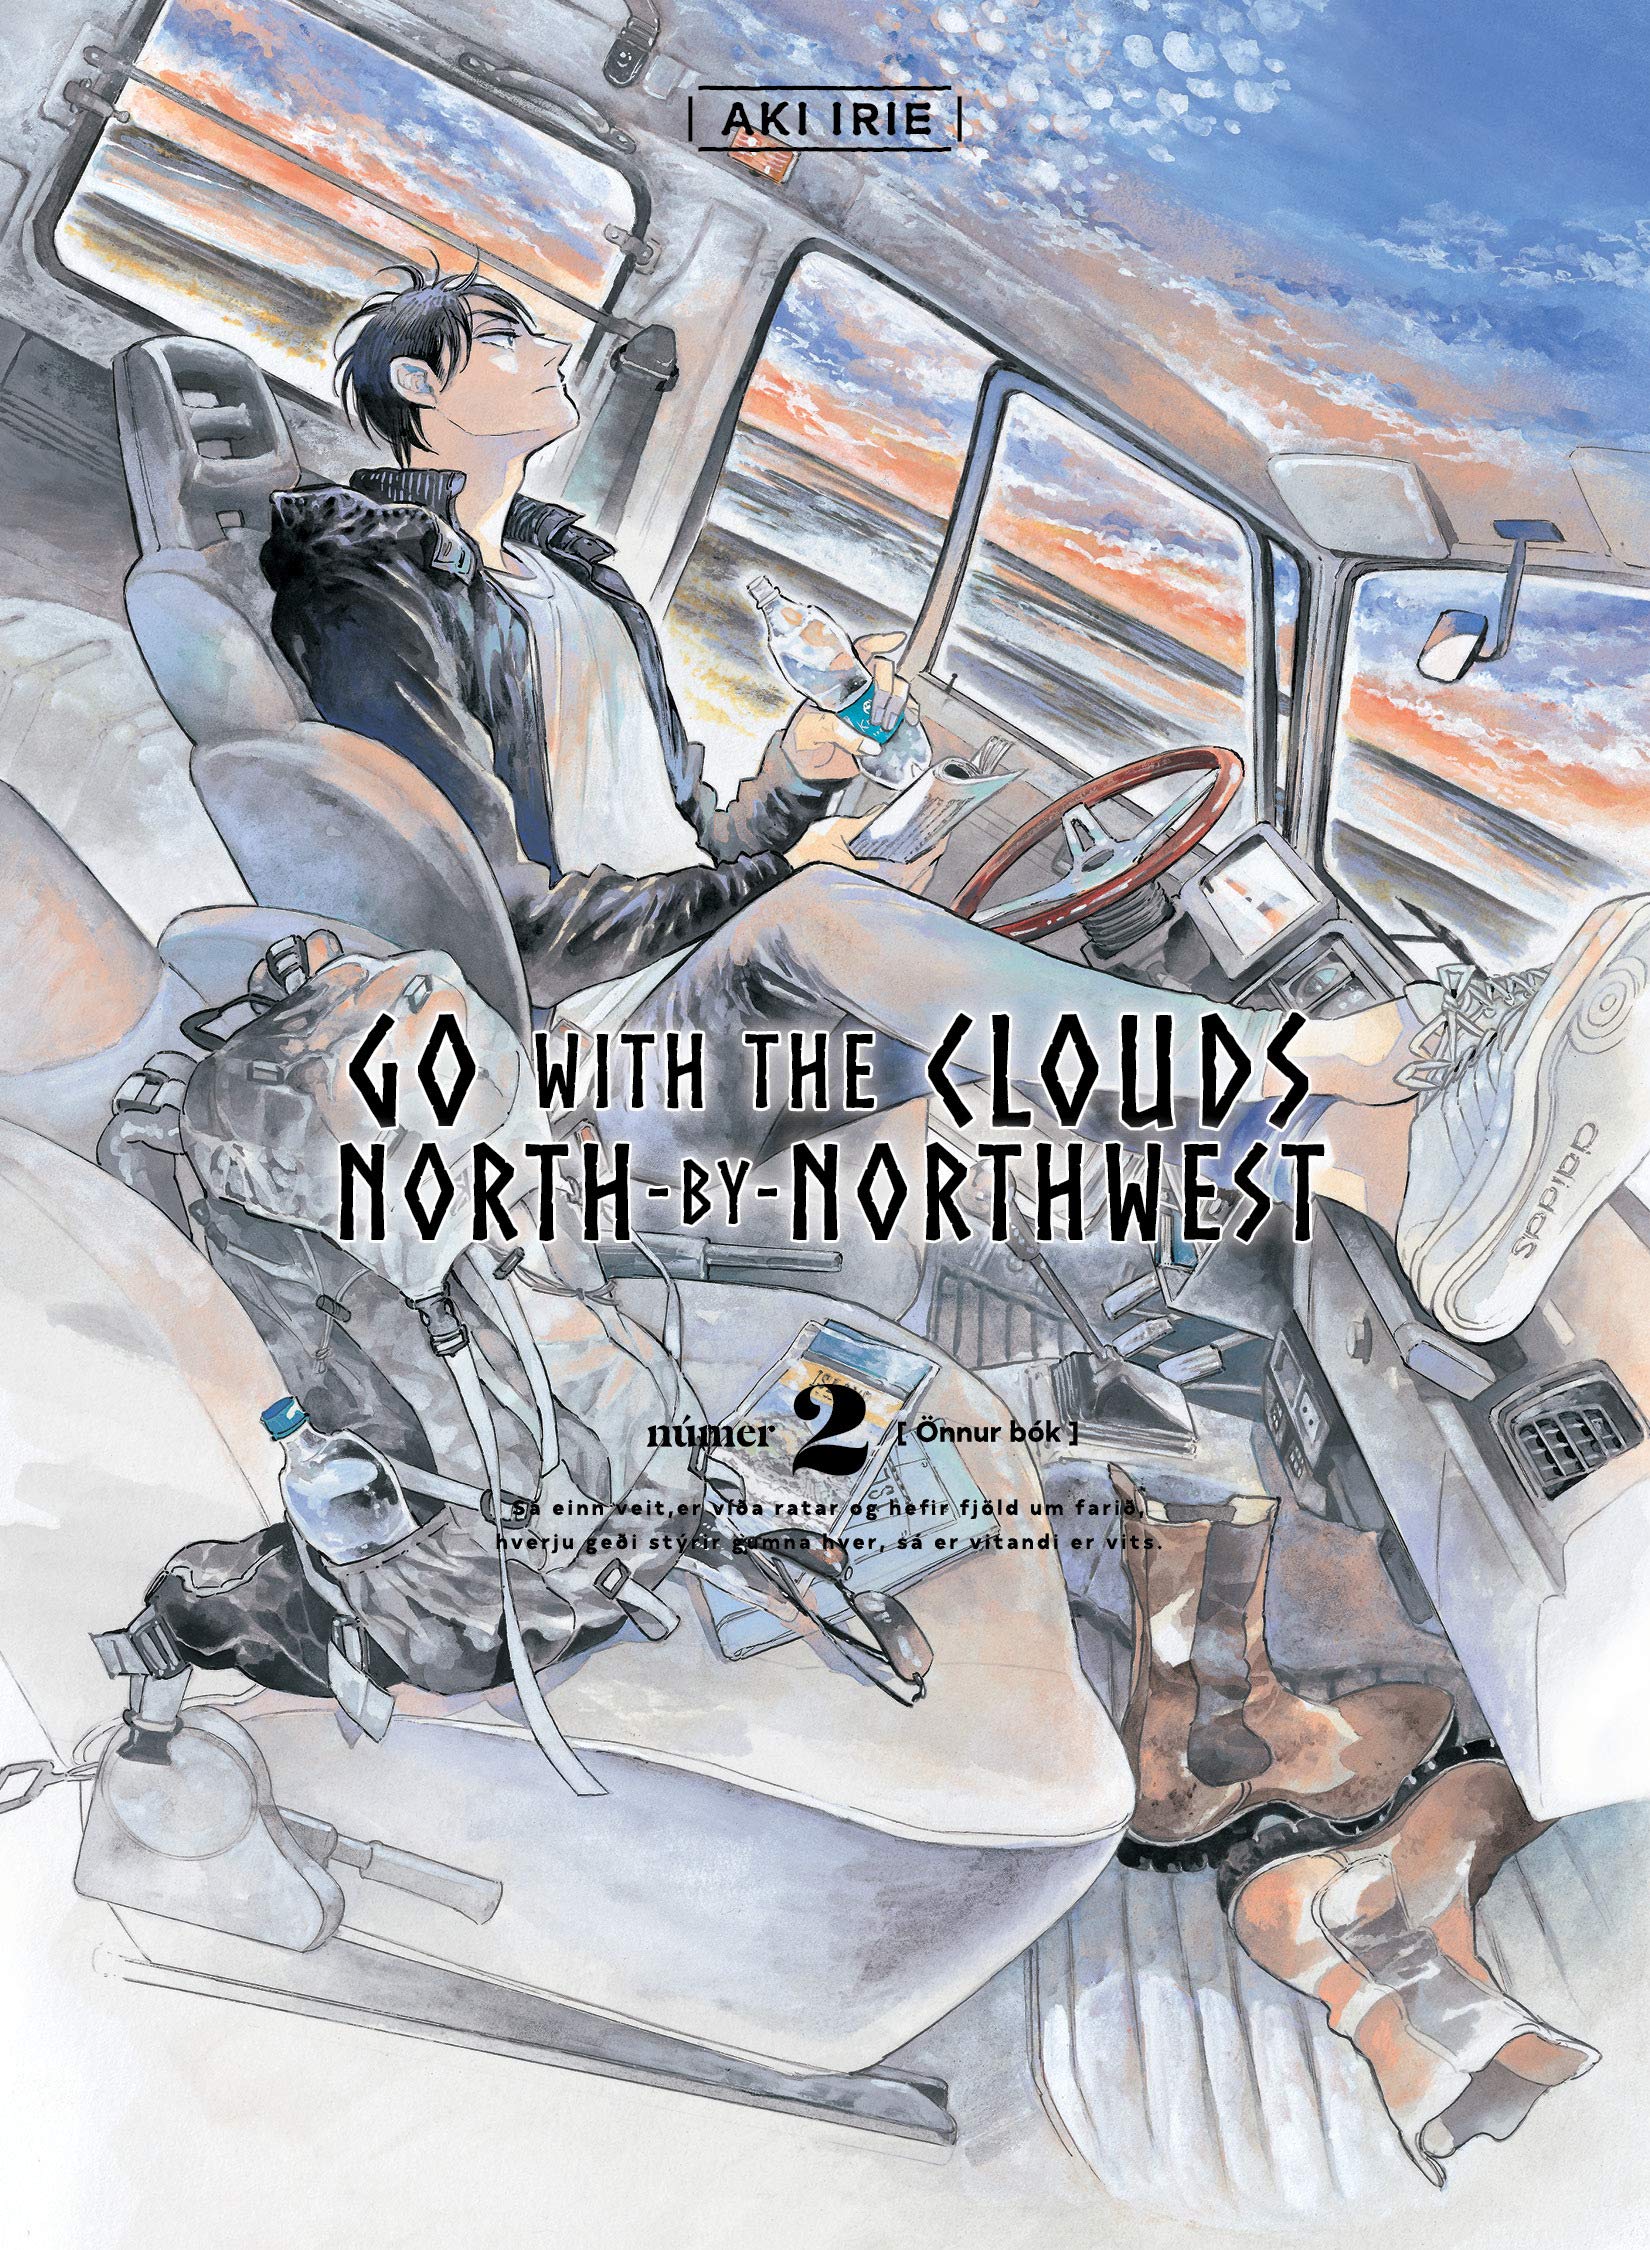 Go with the Clouds, North-By-Northwest Vol. 02